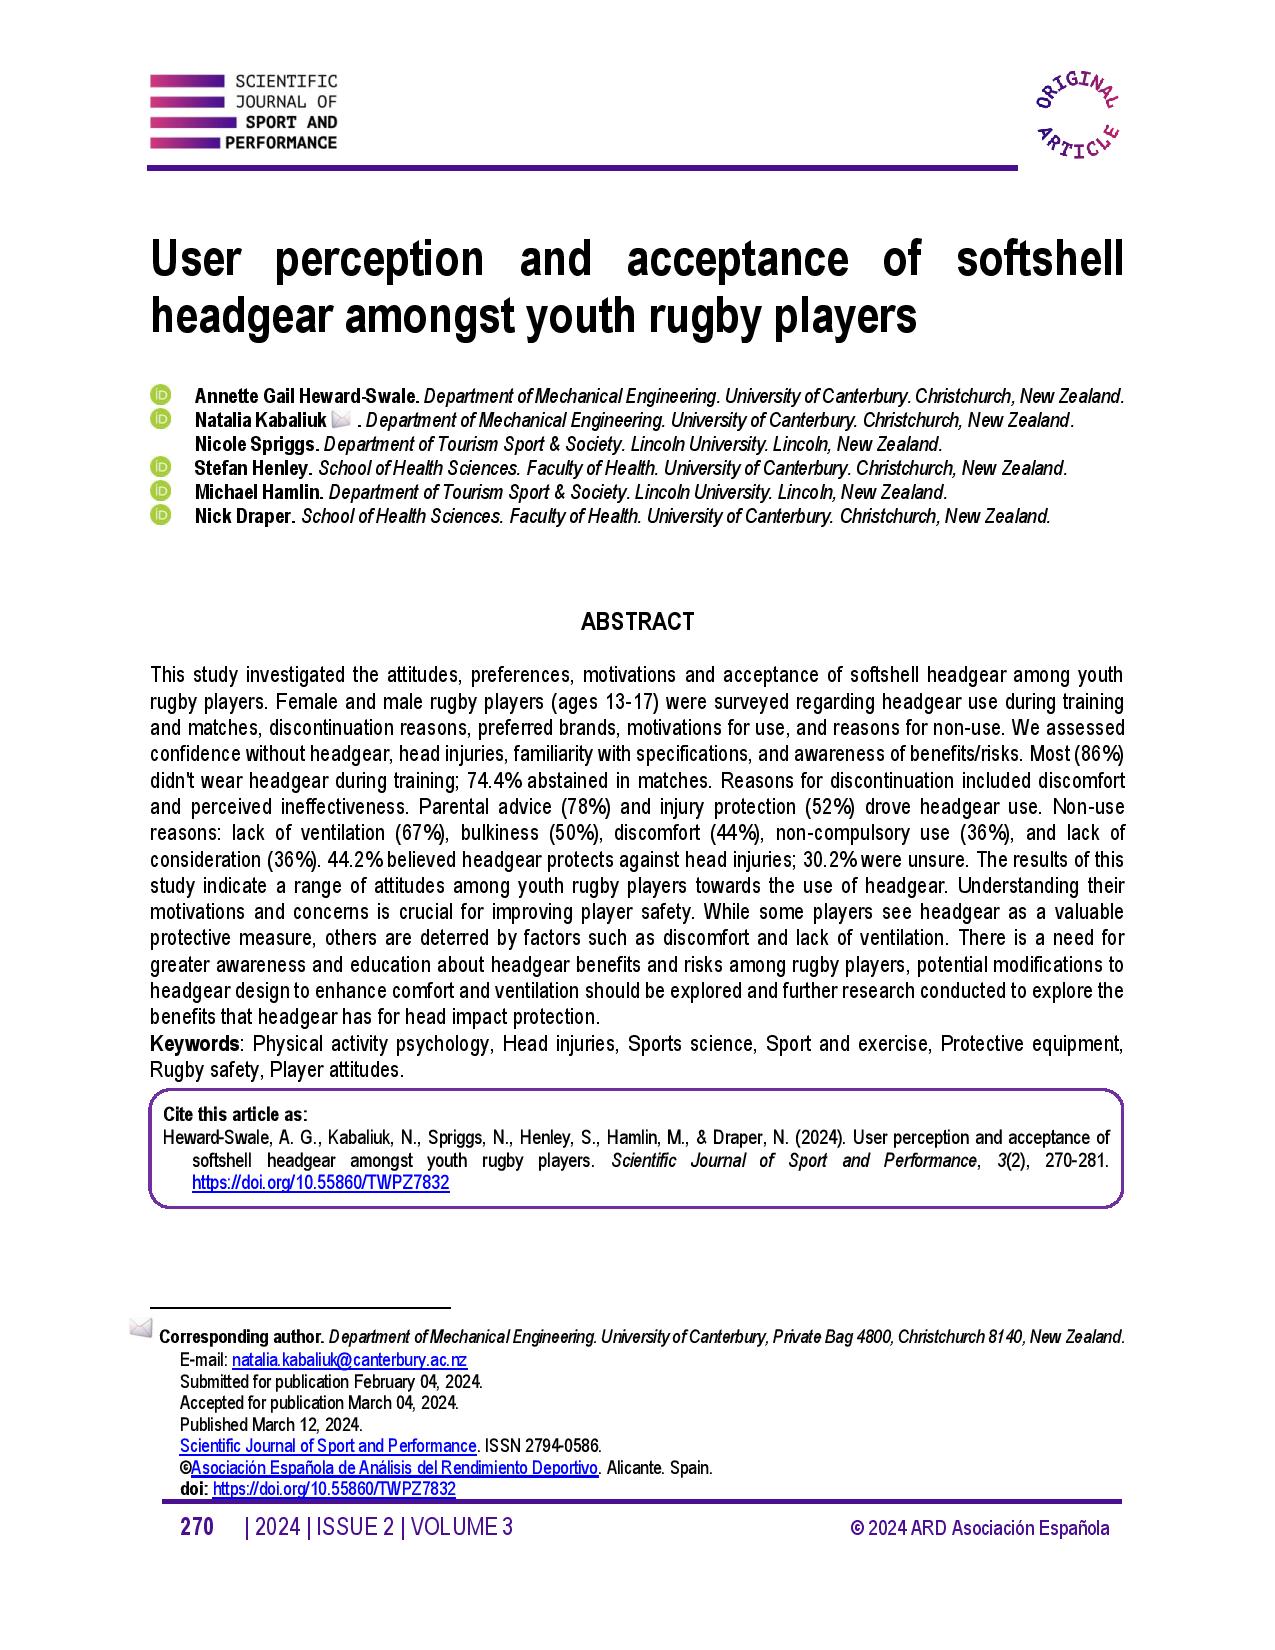 User perception and acceptance of softshell headgear amongst youth rugby players